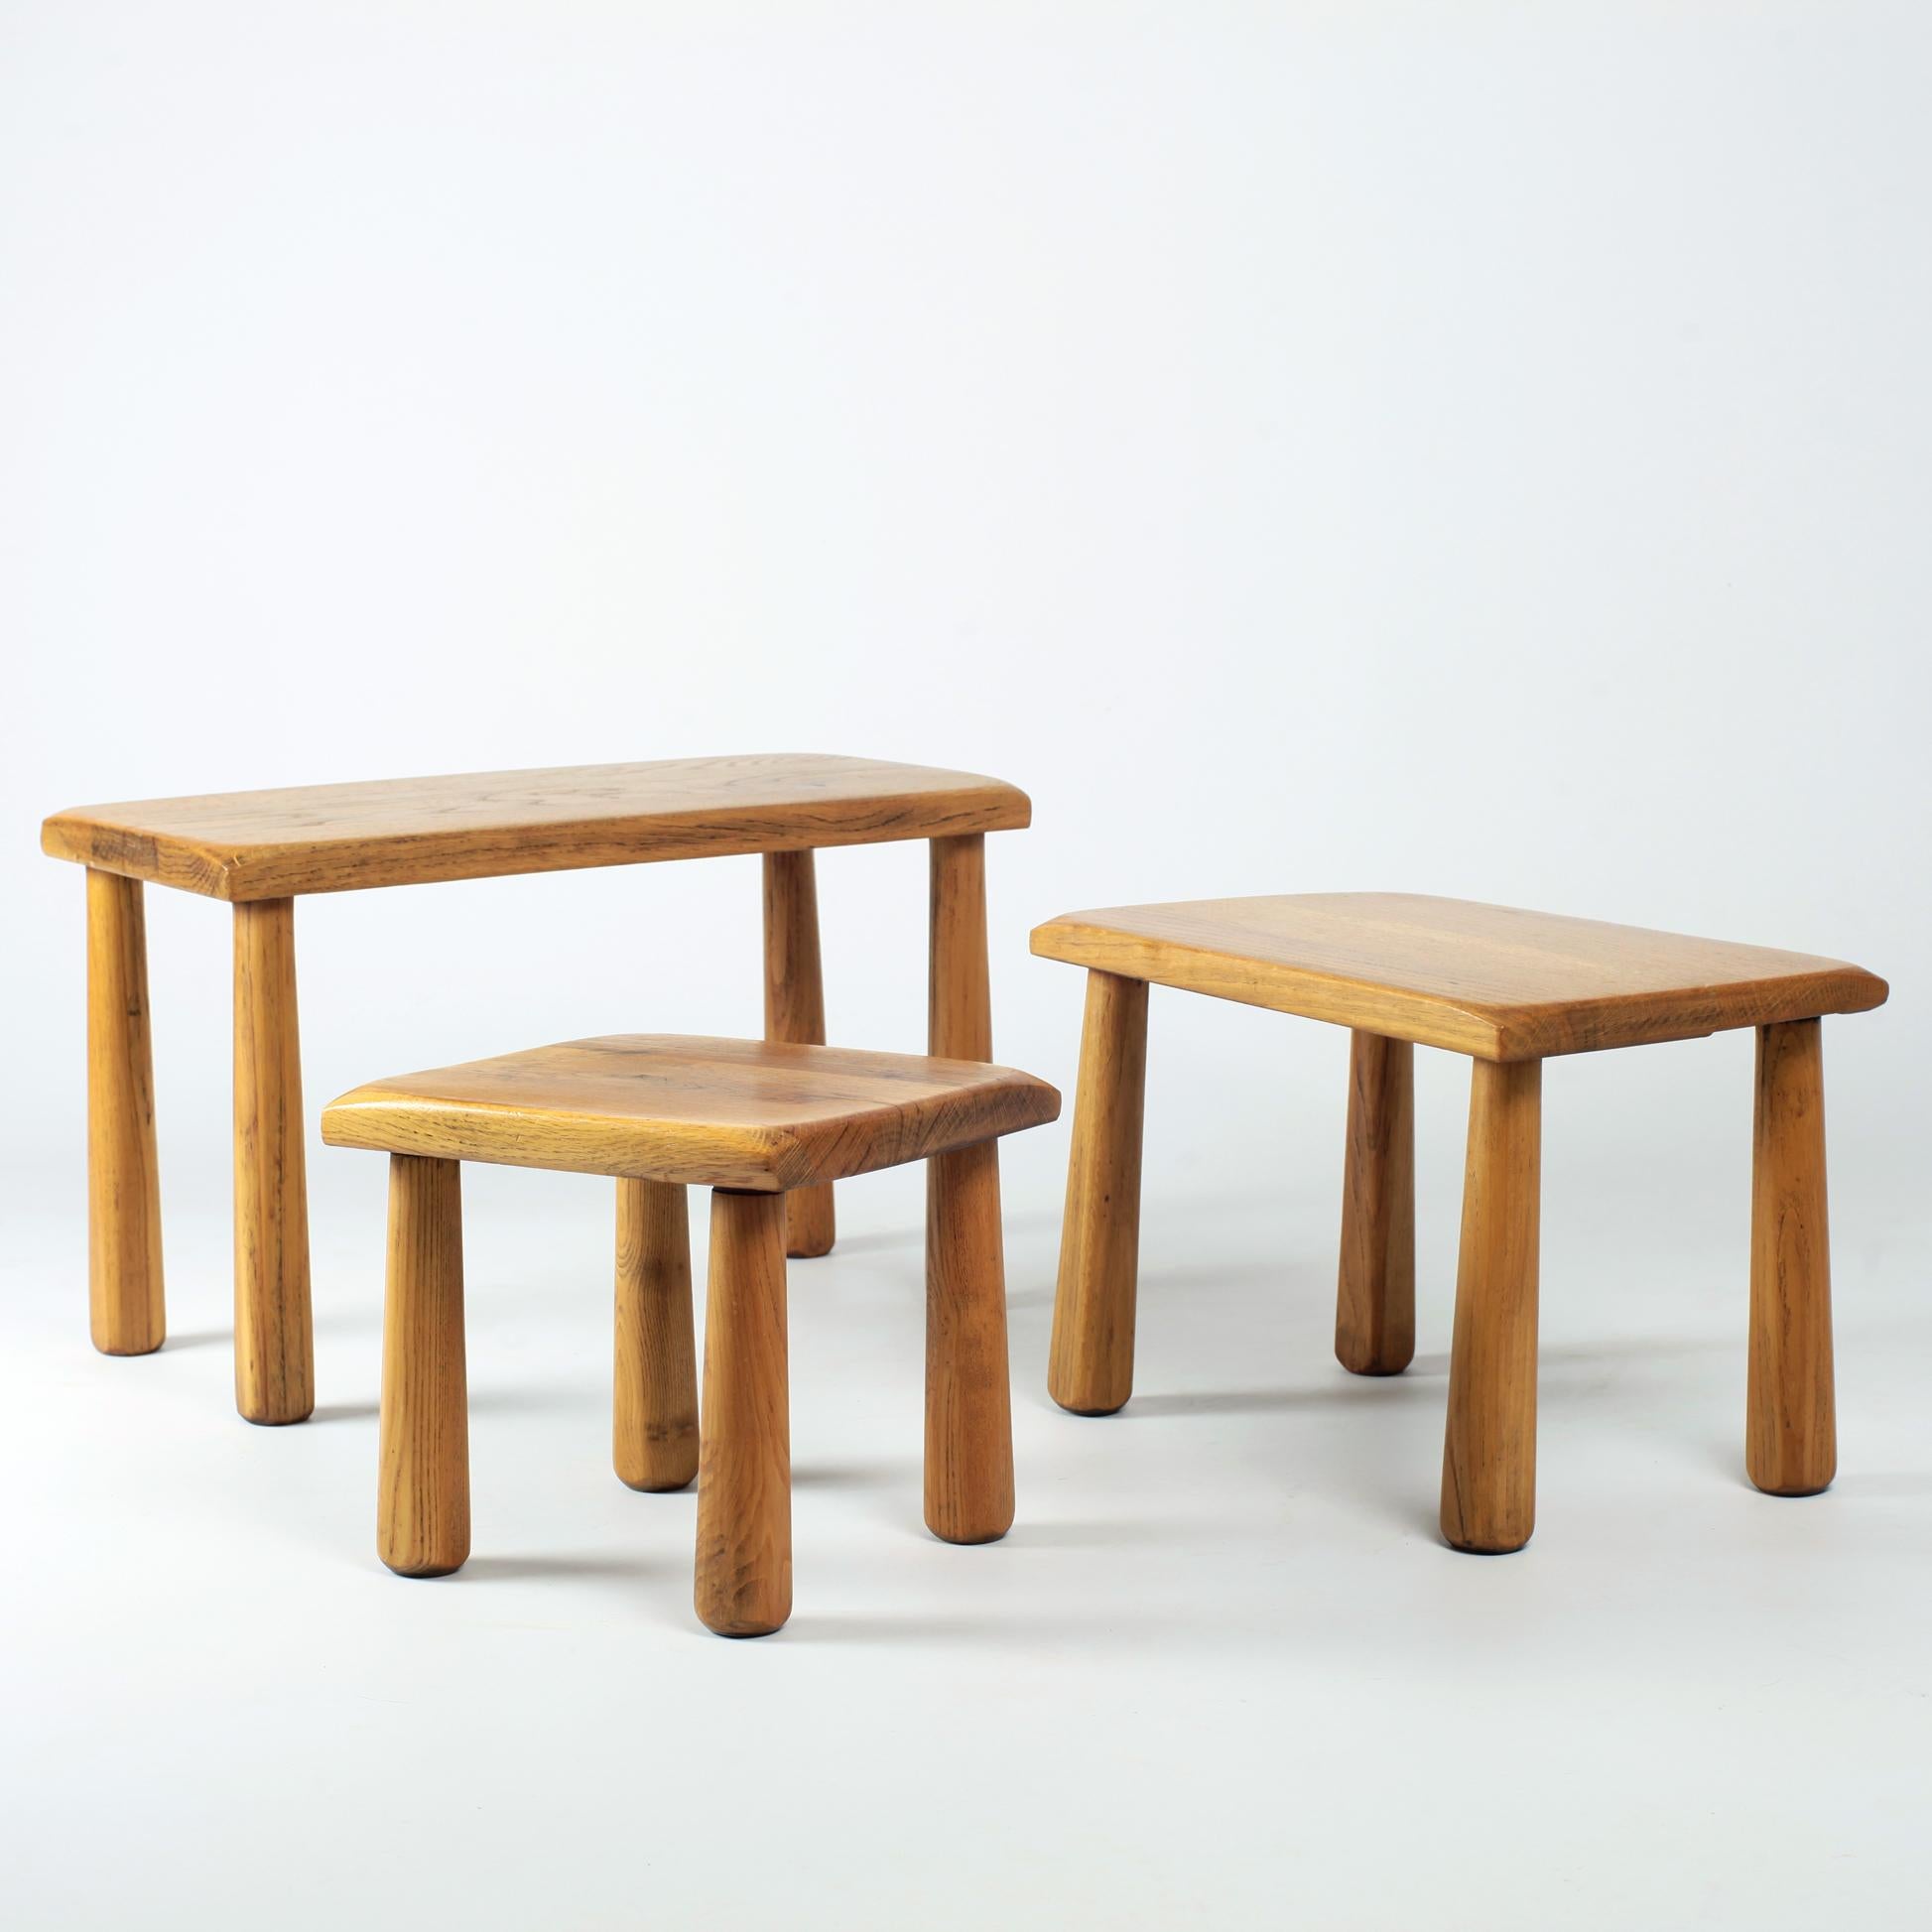 Set of three solid oak nesting tables in the style of Charlotte Perriand, 1960s.
Nice patina
Measures: 58cm x 27cm H 35cm
44cm x 28cm H 30cm
28,5cm x 28cm H 26.
   